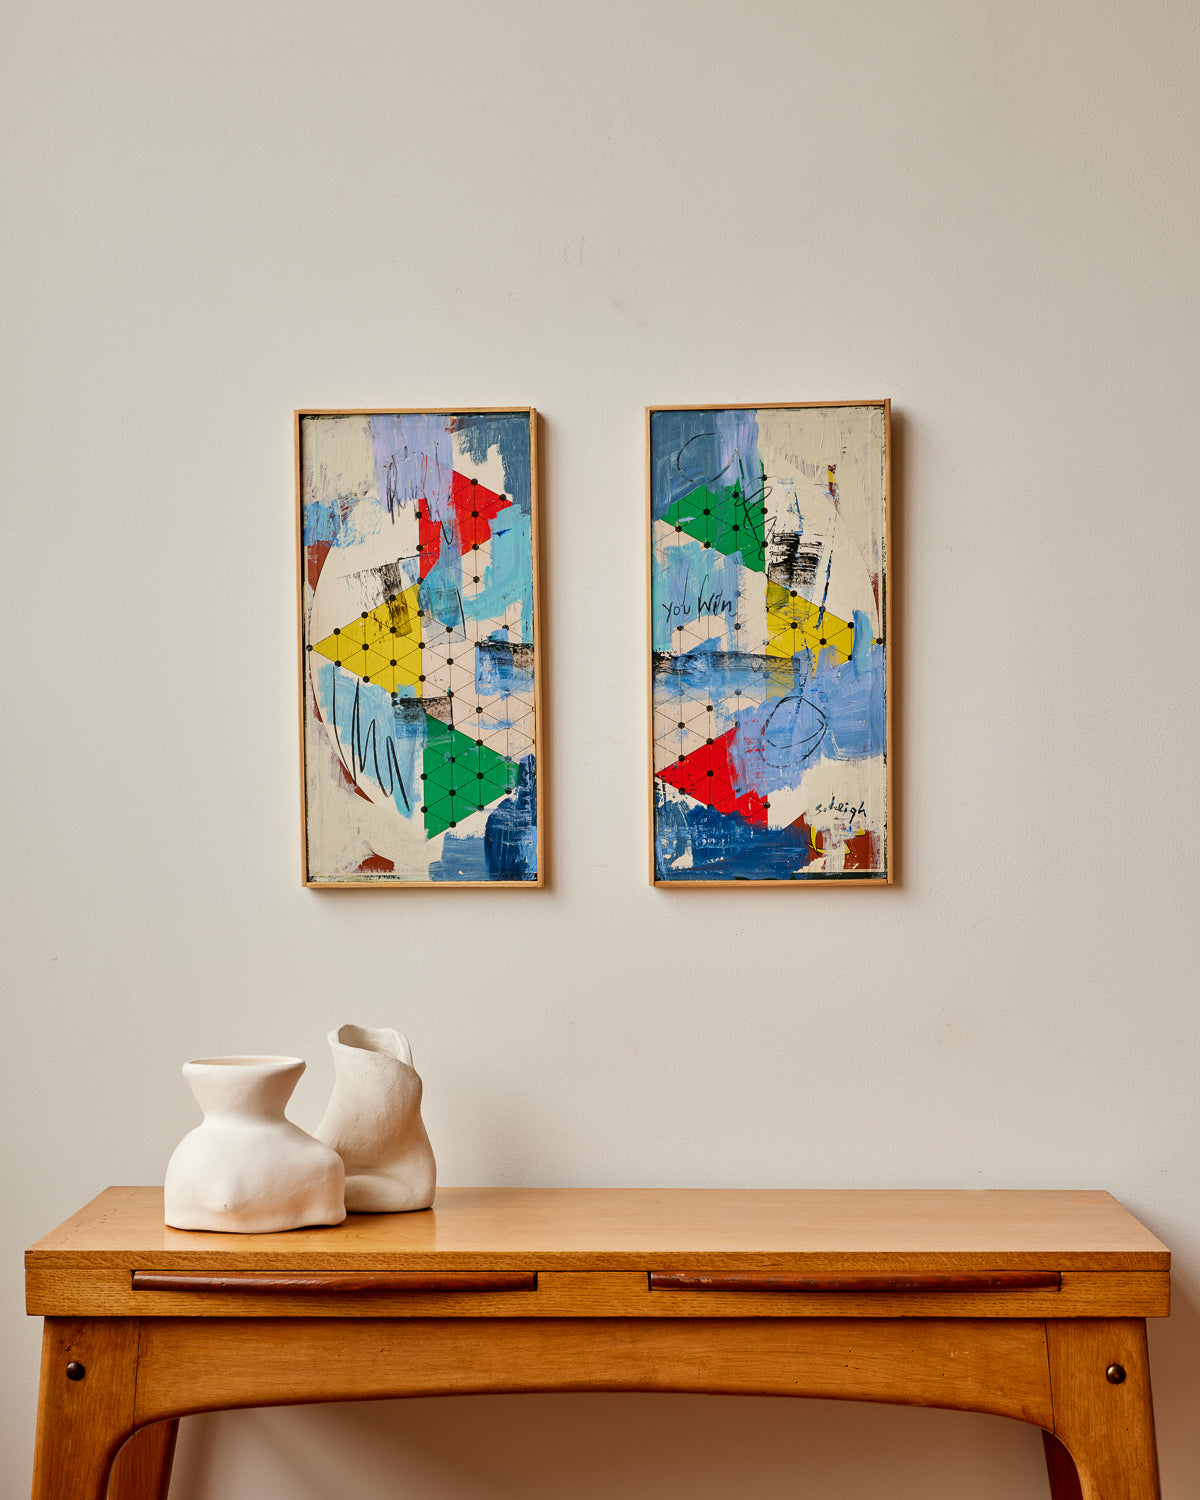 "I Win - You Win" Diptych by Stephen Heigh